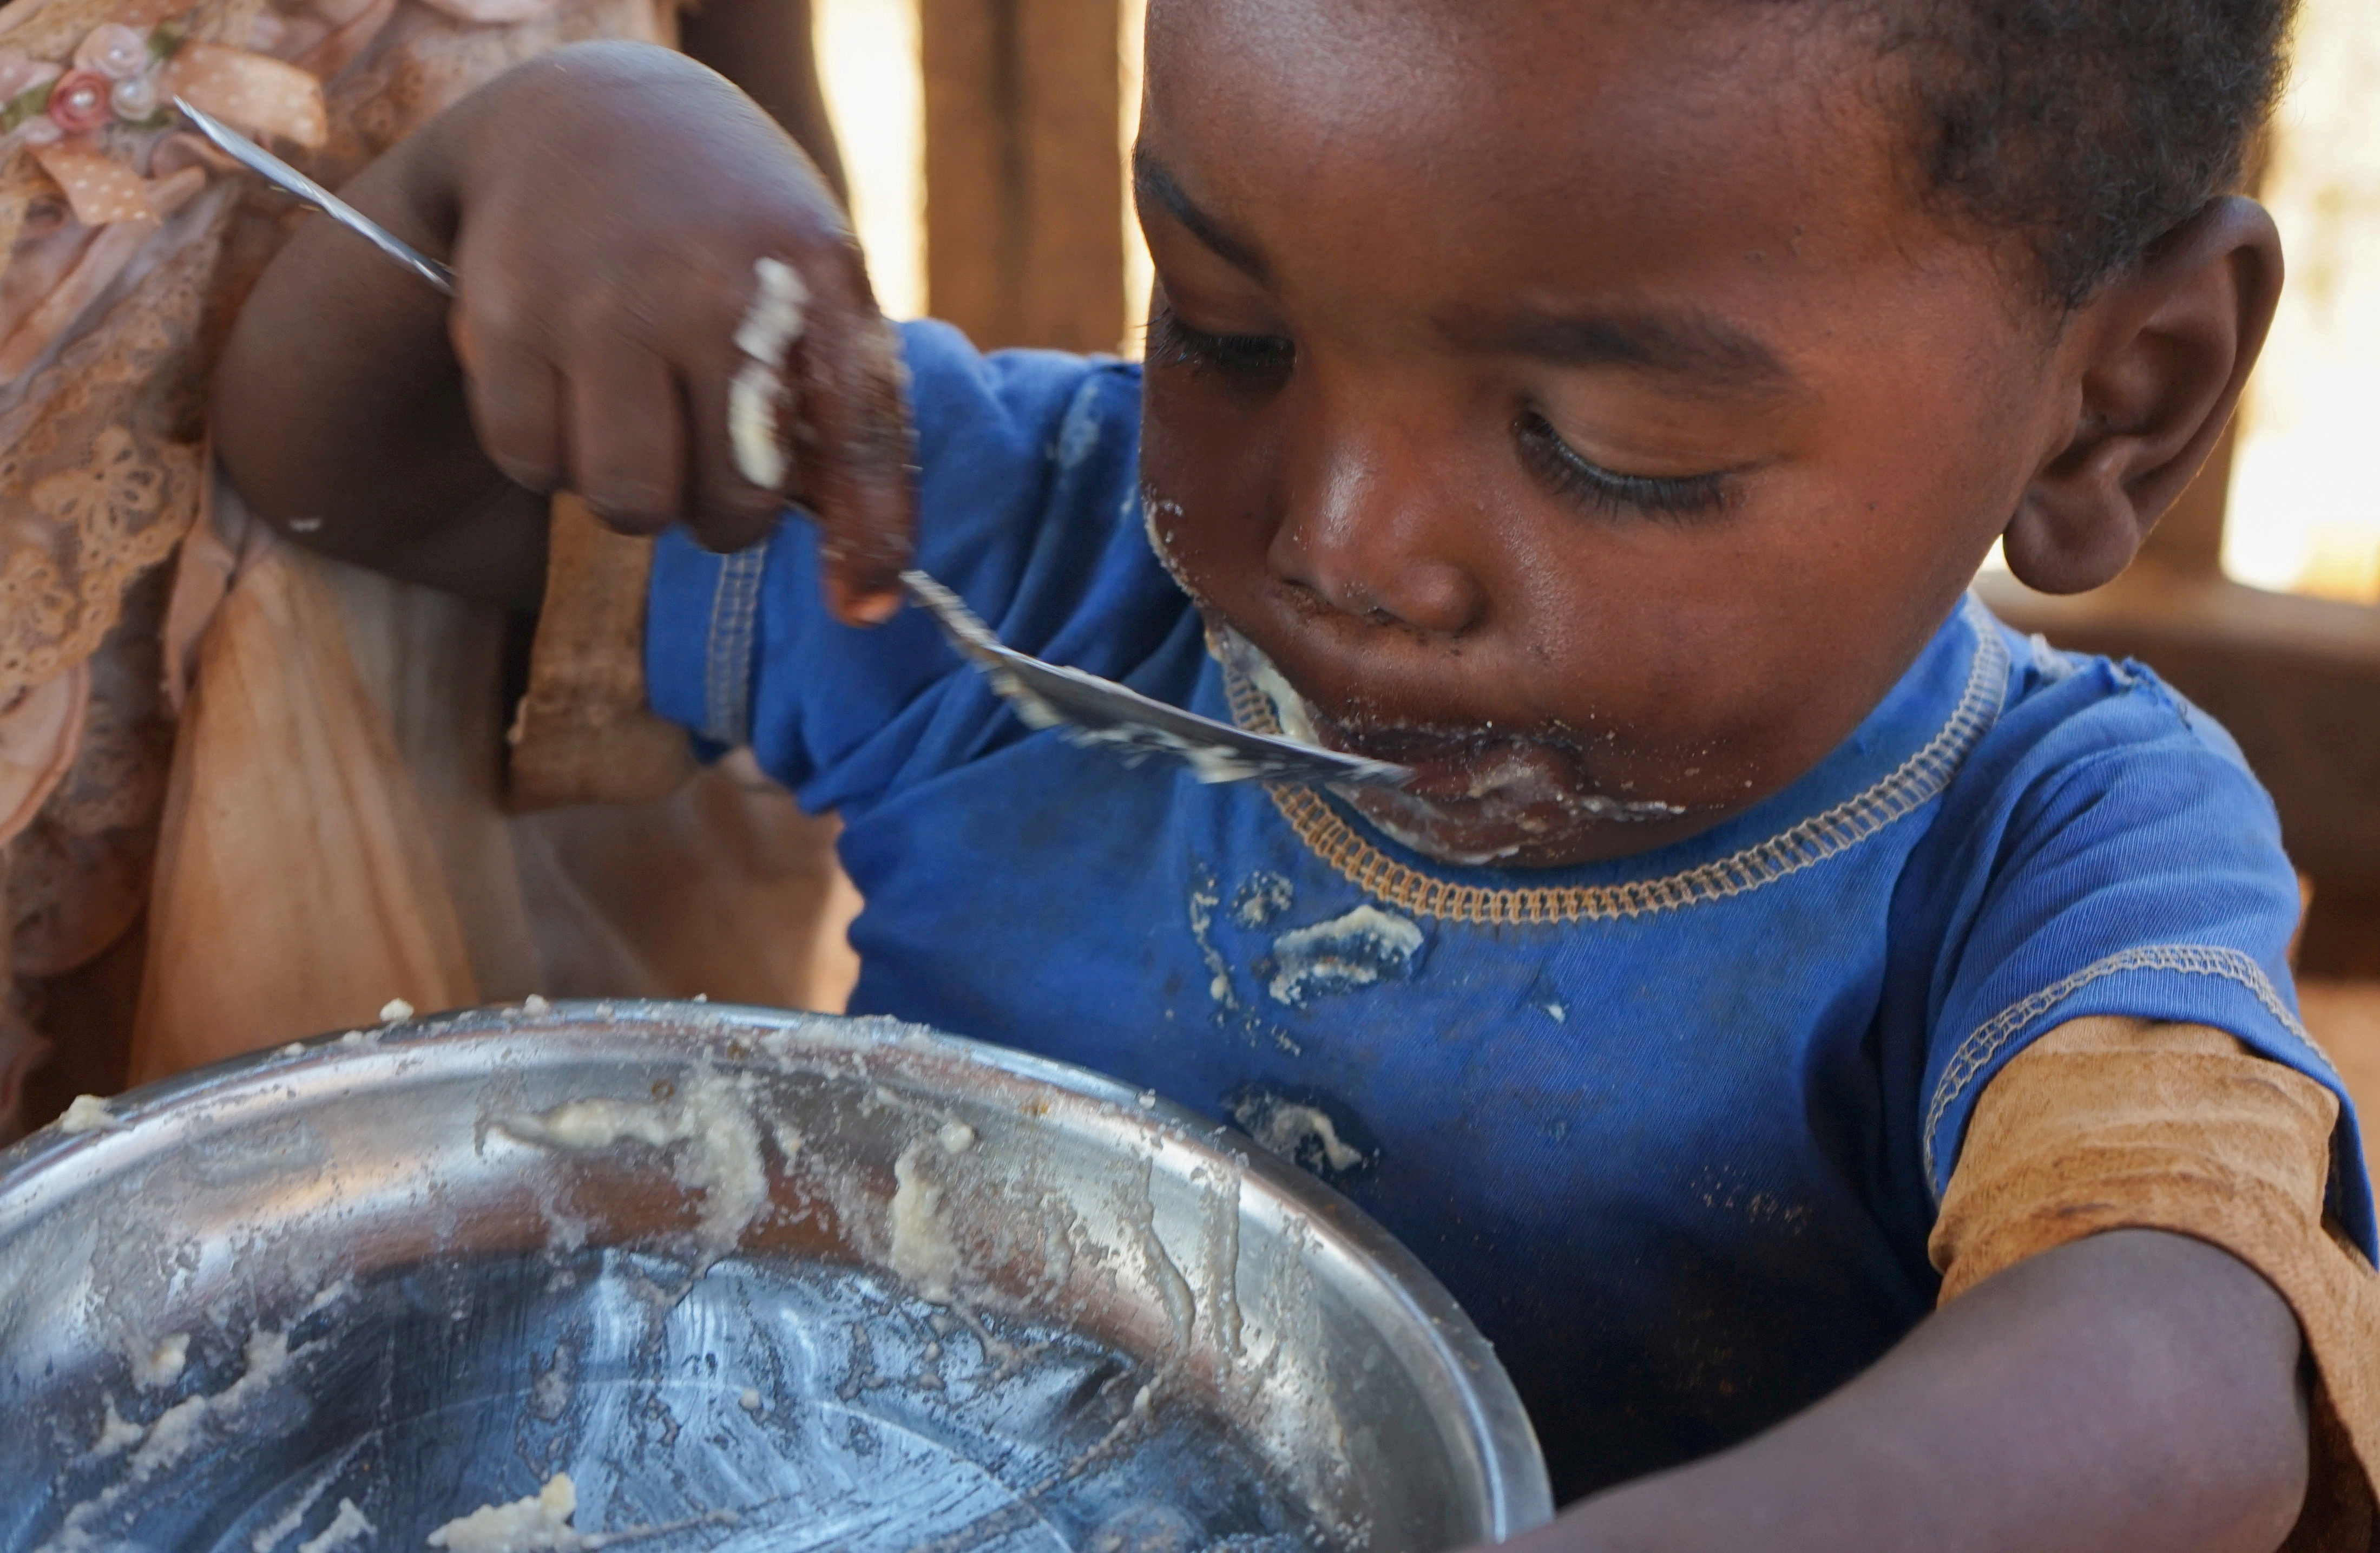 A Malagasy child eats a meal at the Avotse feeding program that benefits malnourished children with hot meals in Maropia Nord village in the region of Anosy, southern Madagascar September 30, 2021. Picture taken September 30, 2021. REUTERS/Joel Kouam